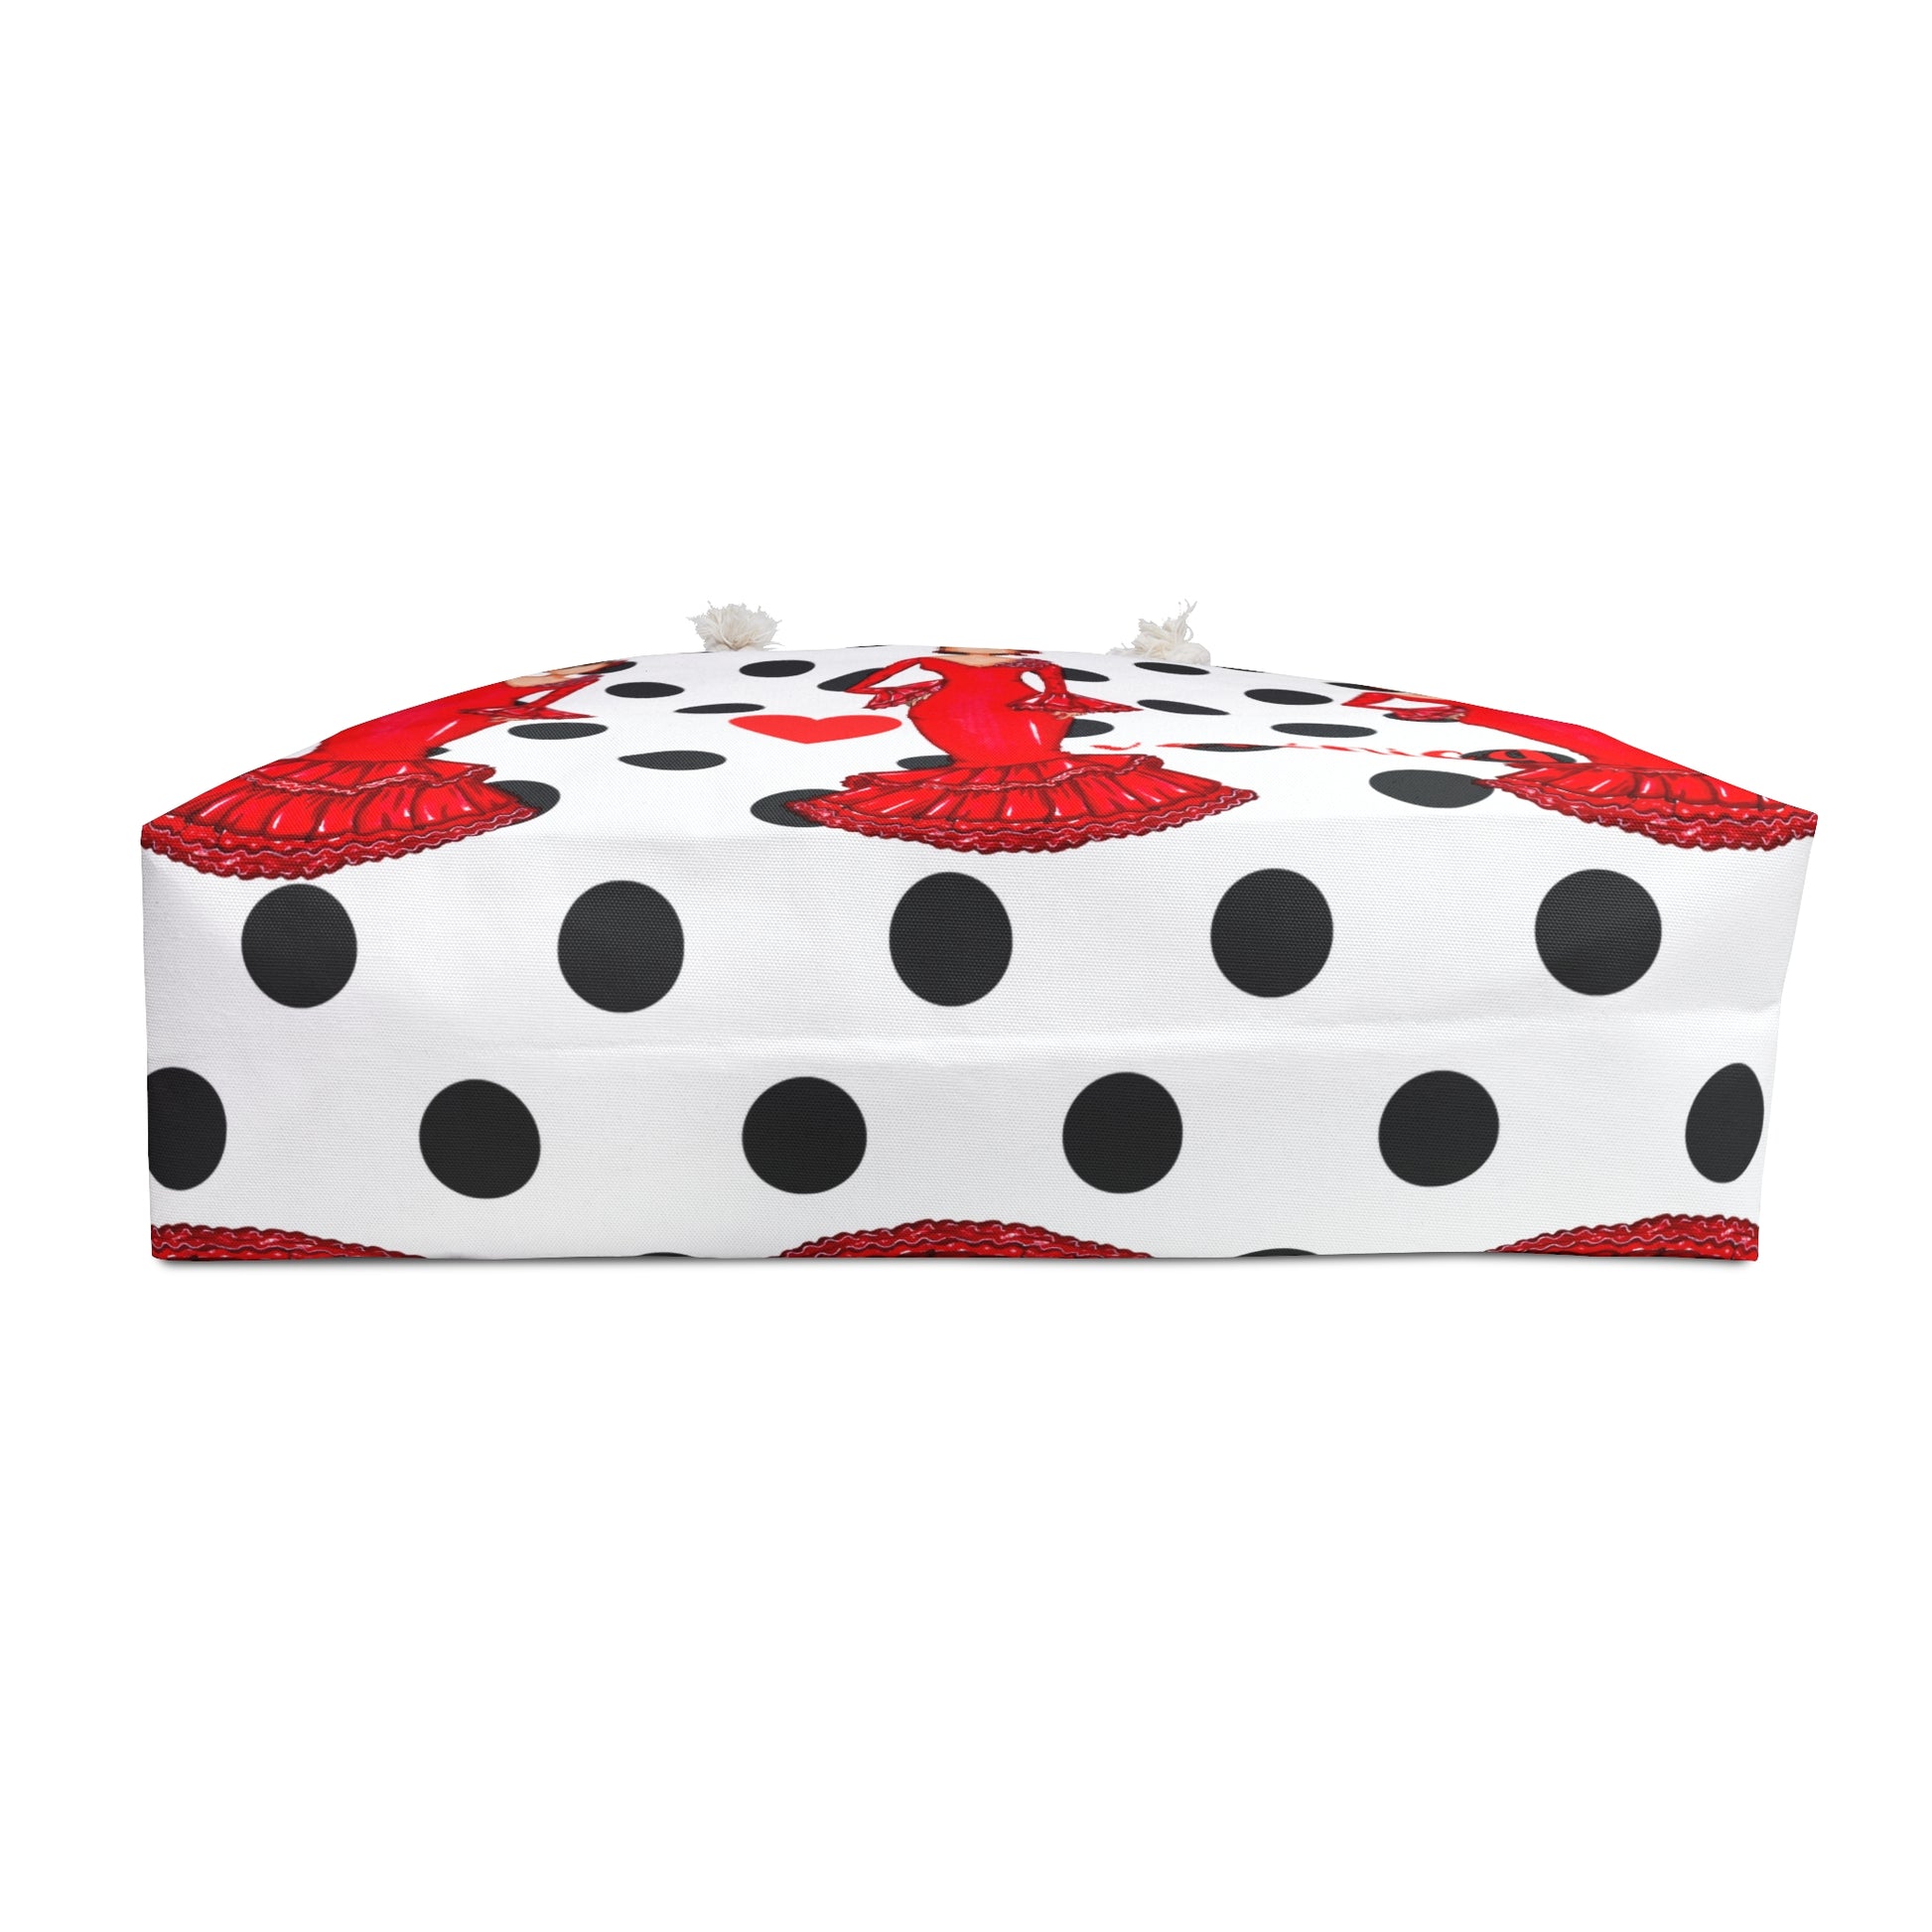 a white box with black dots and a red bow